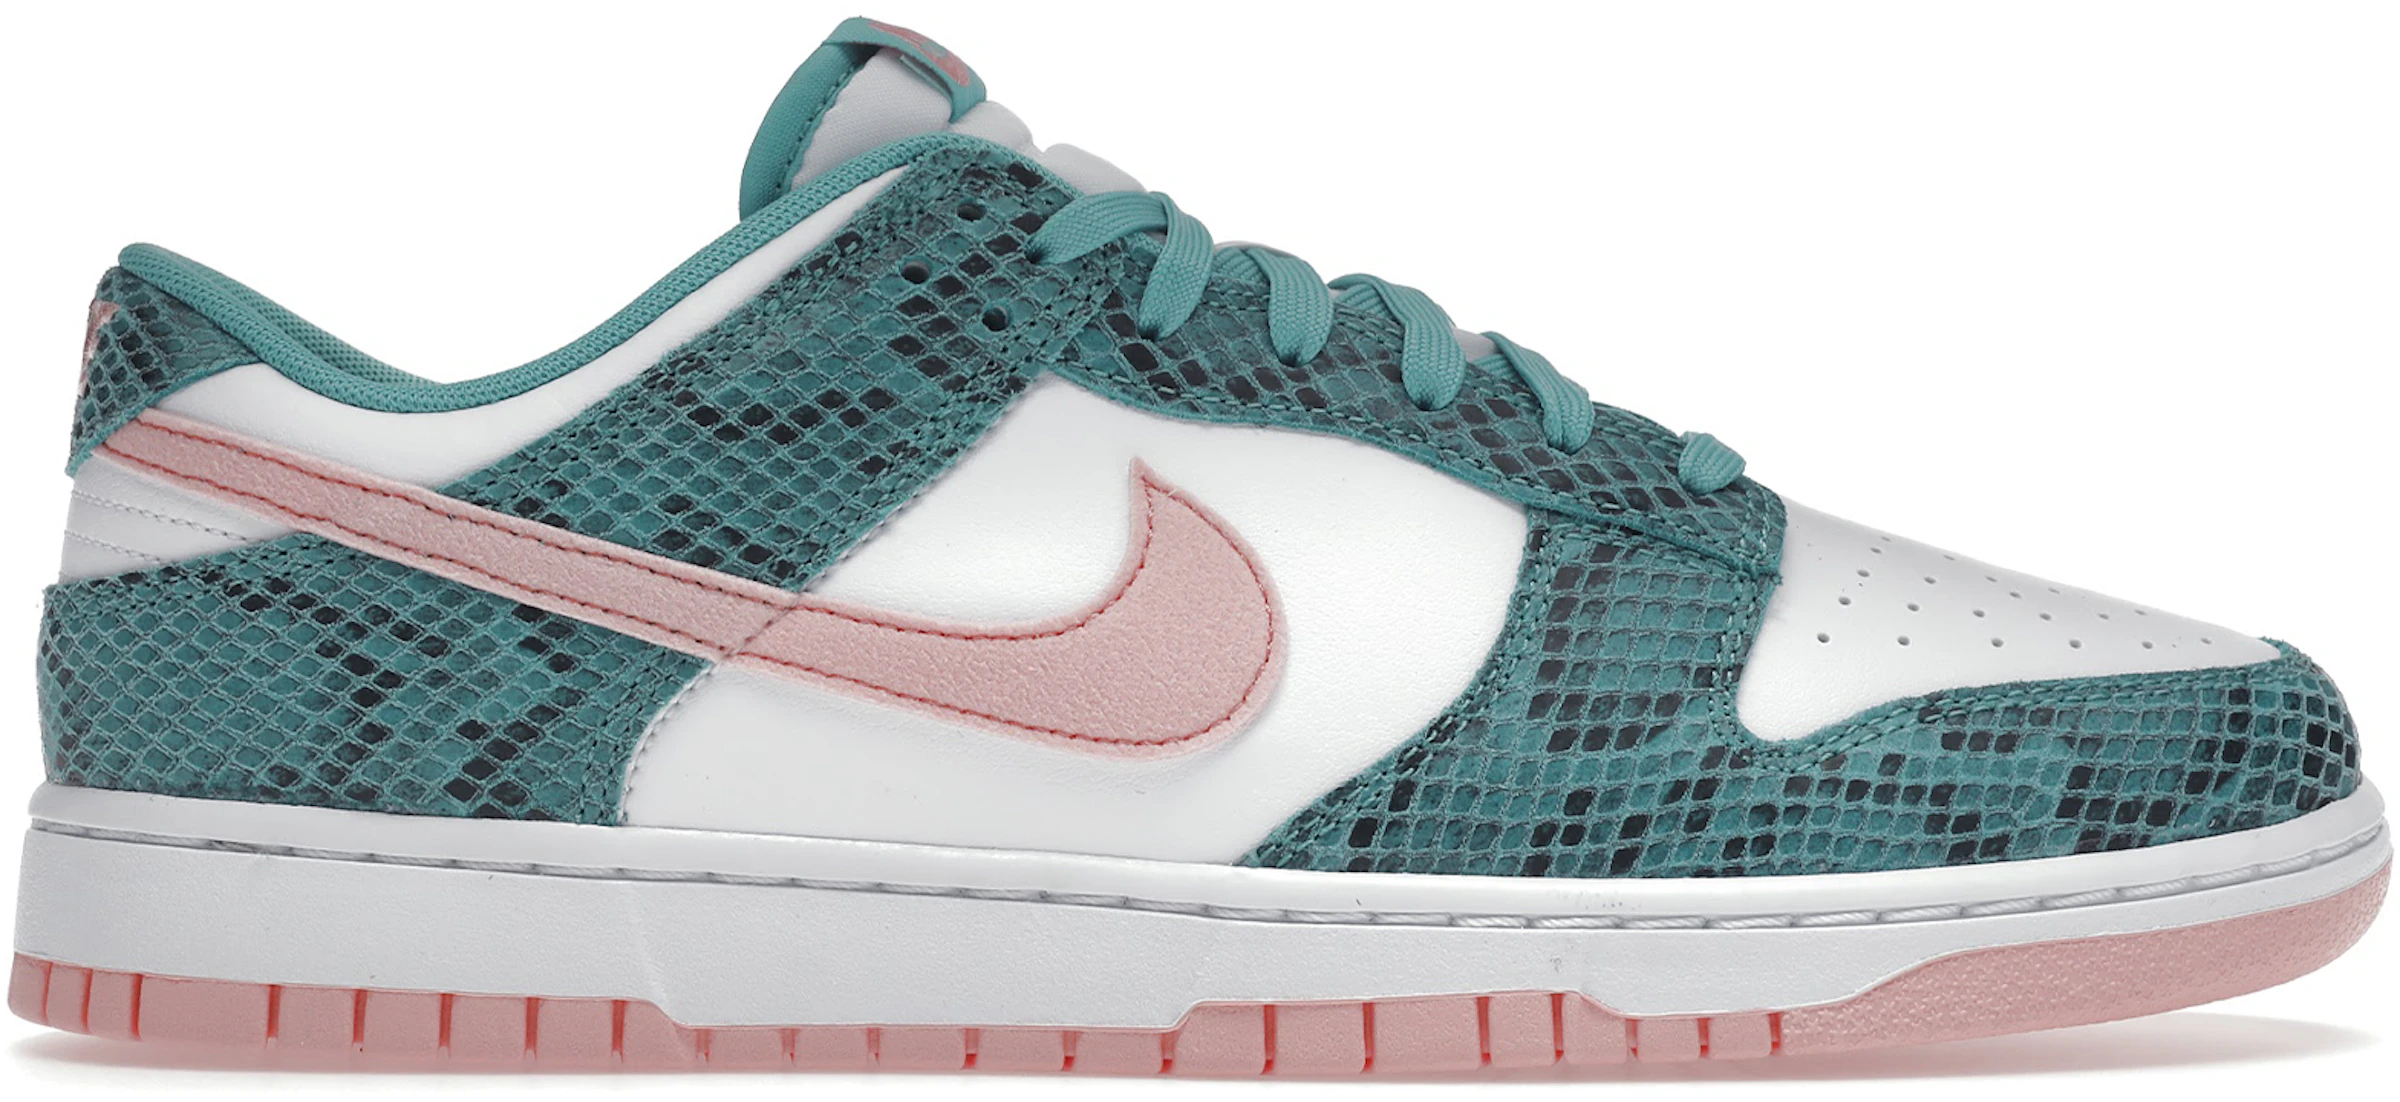 Inquieto agencia Sarabo árabe Nike Dunk Low Snakeskin Washed Teal Bleached Coral - DR8577-300 - ES